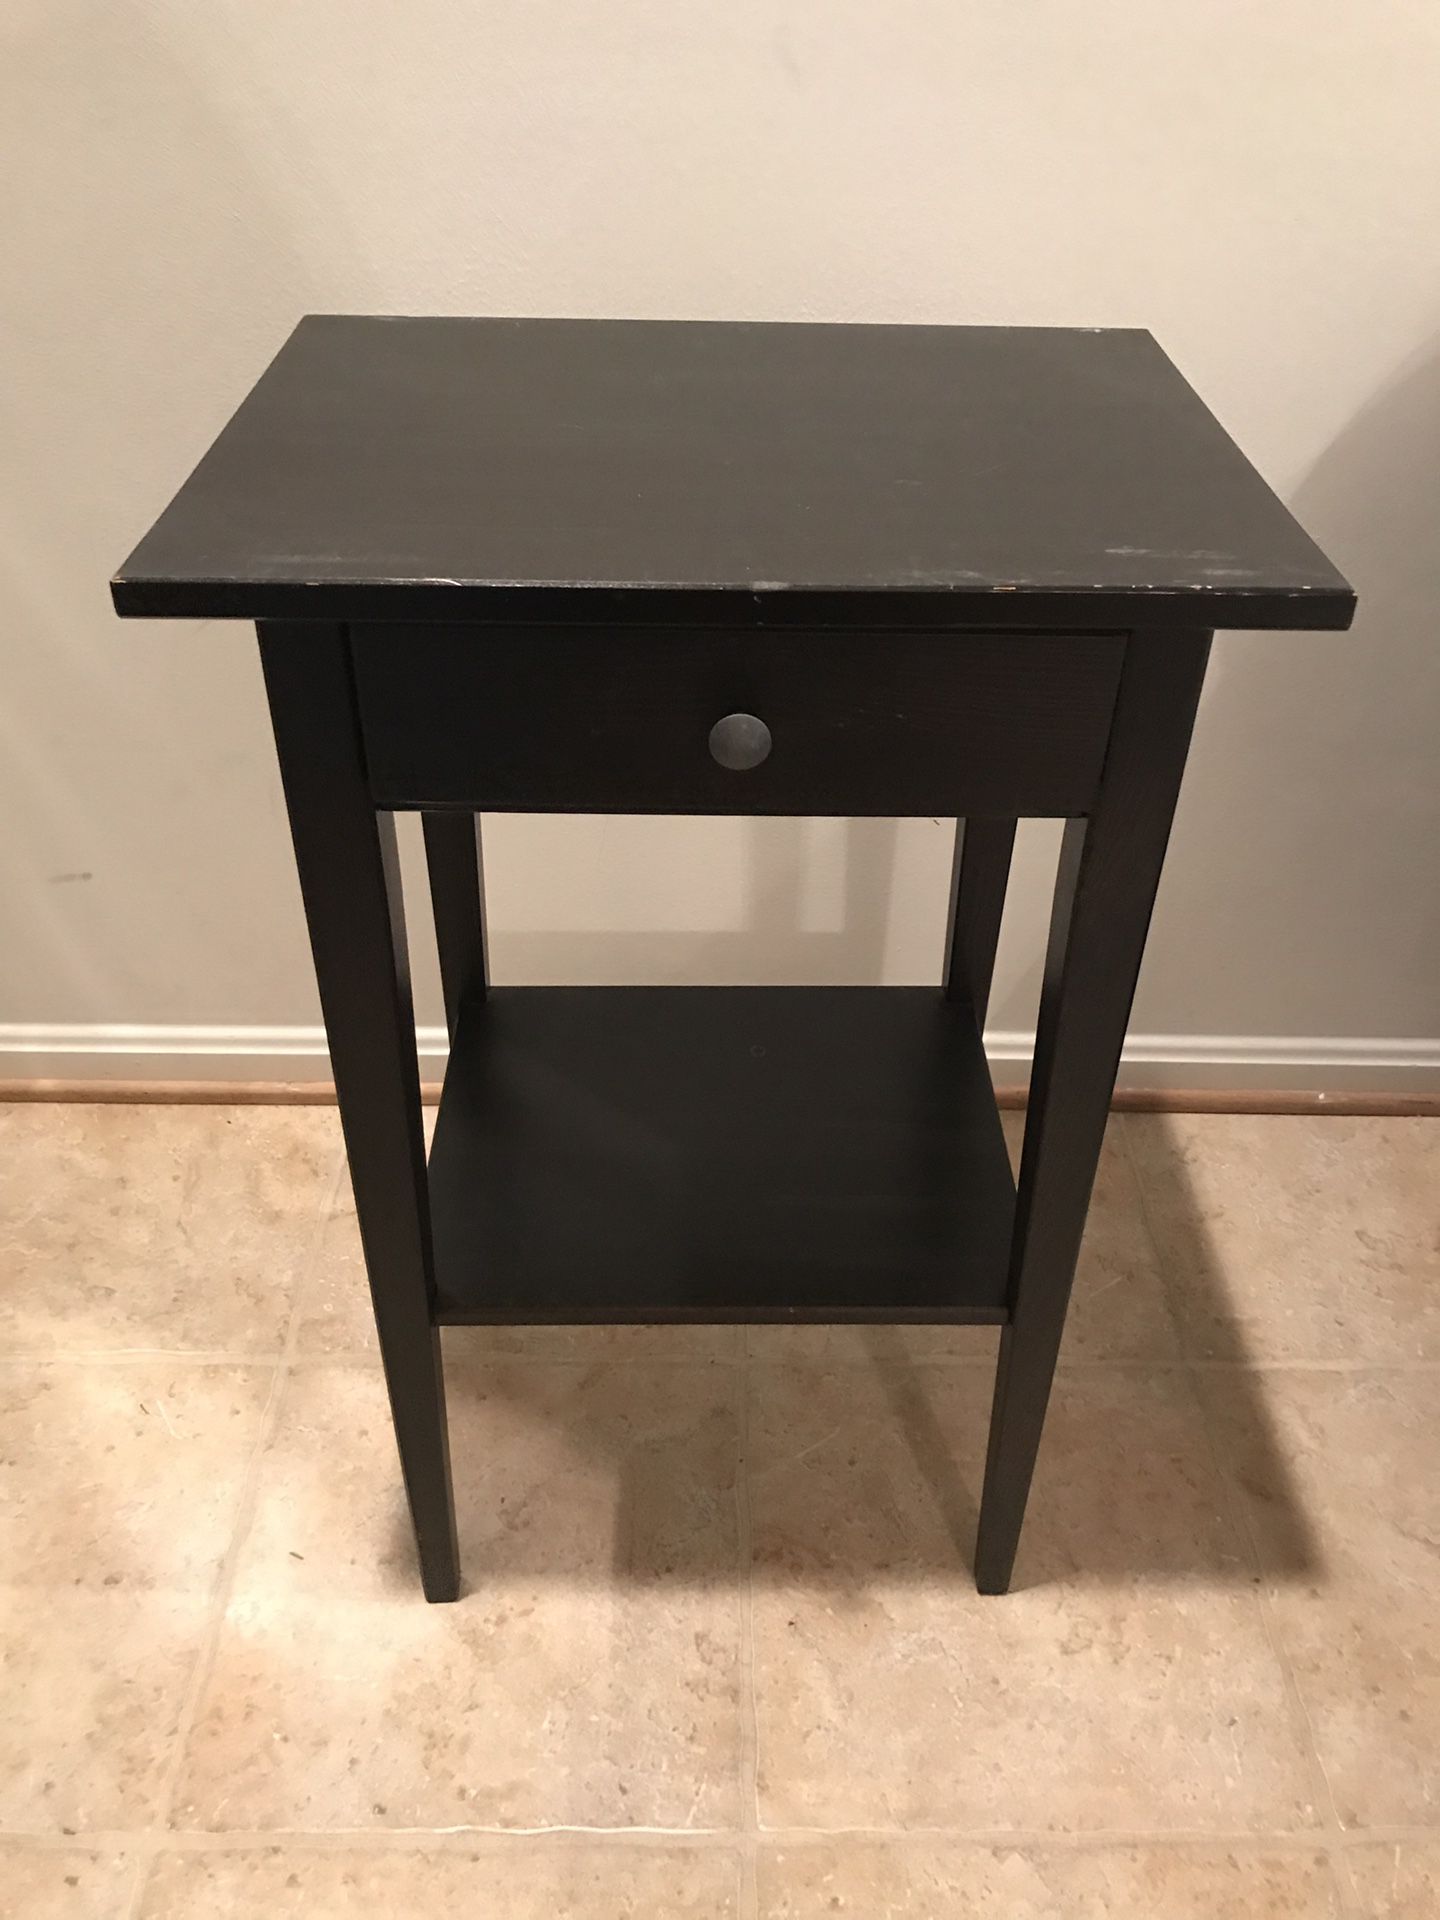 Side table- console table - 27” H x 18” W x 13.5” D